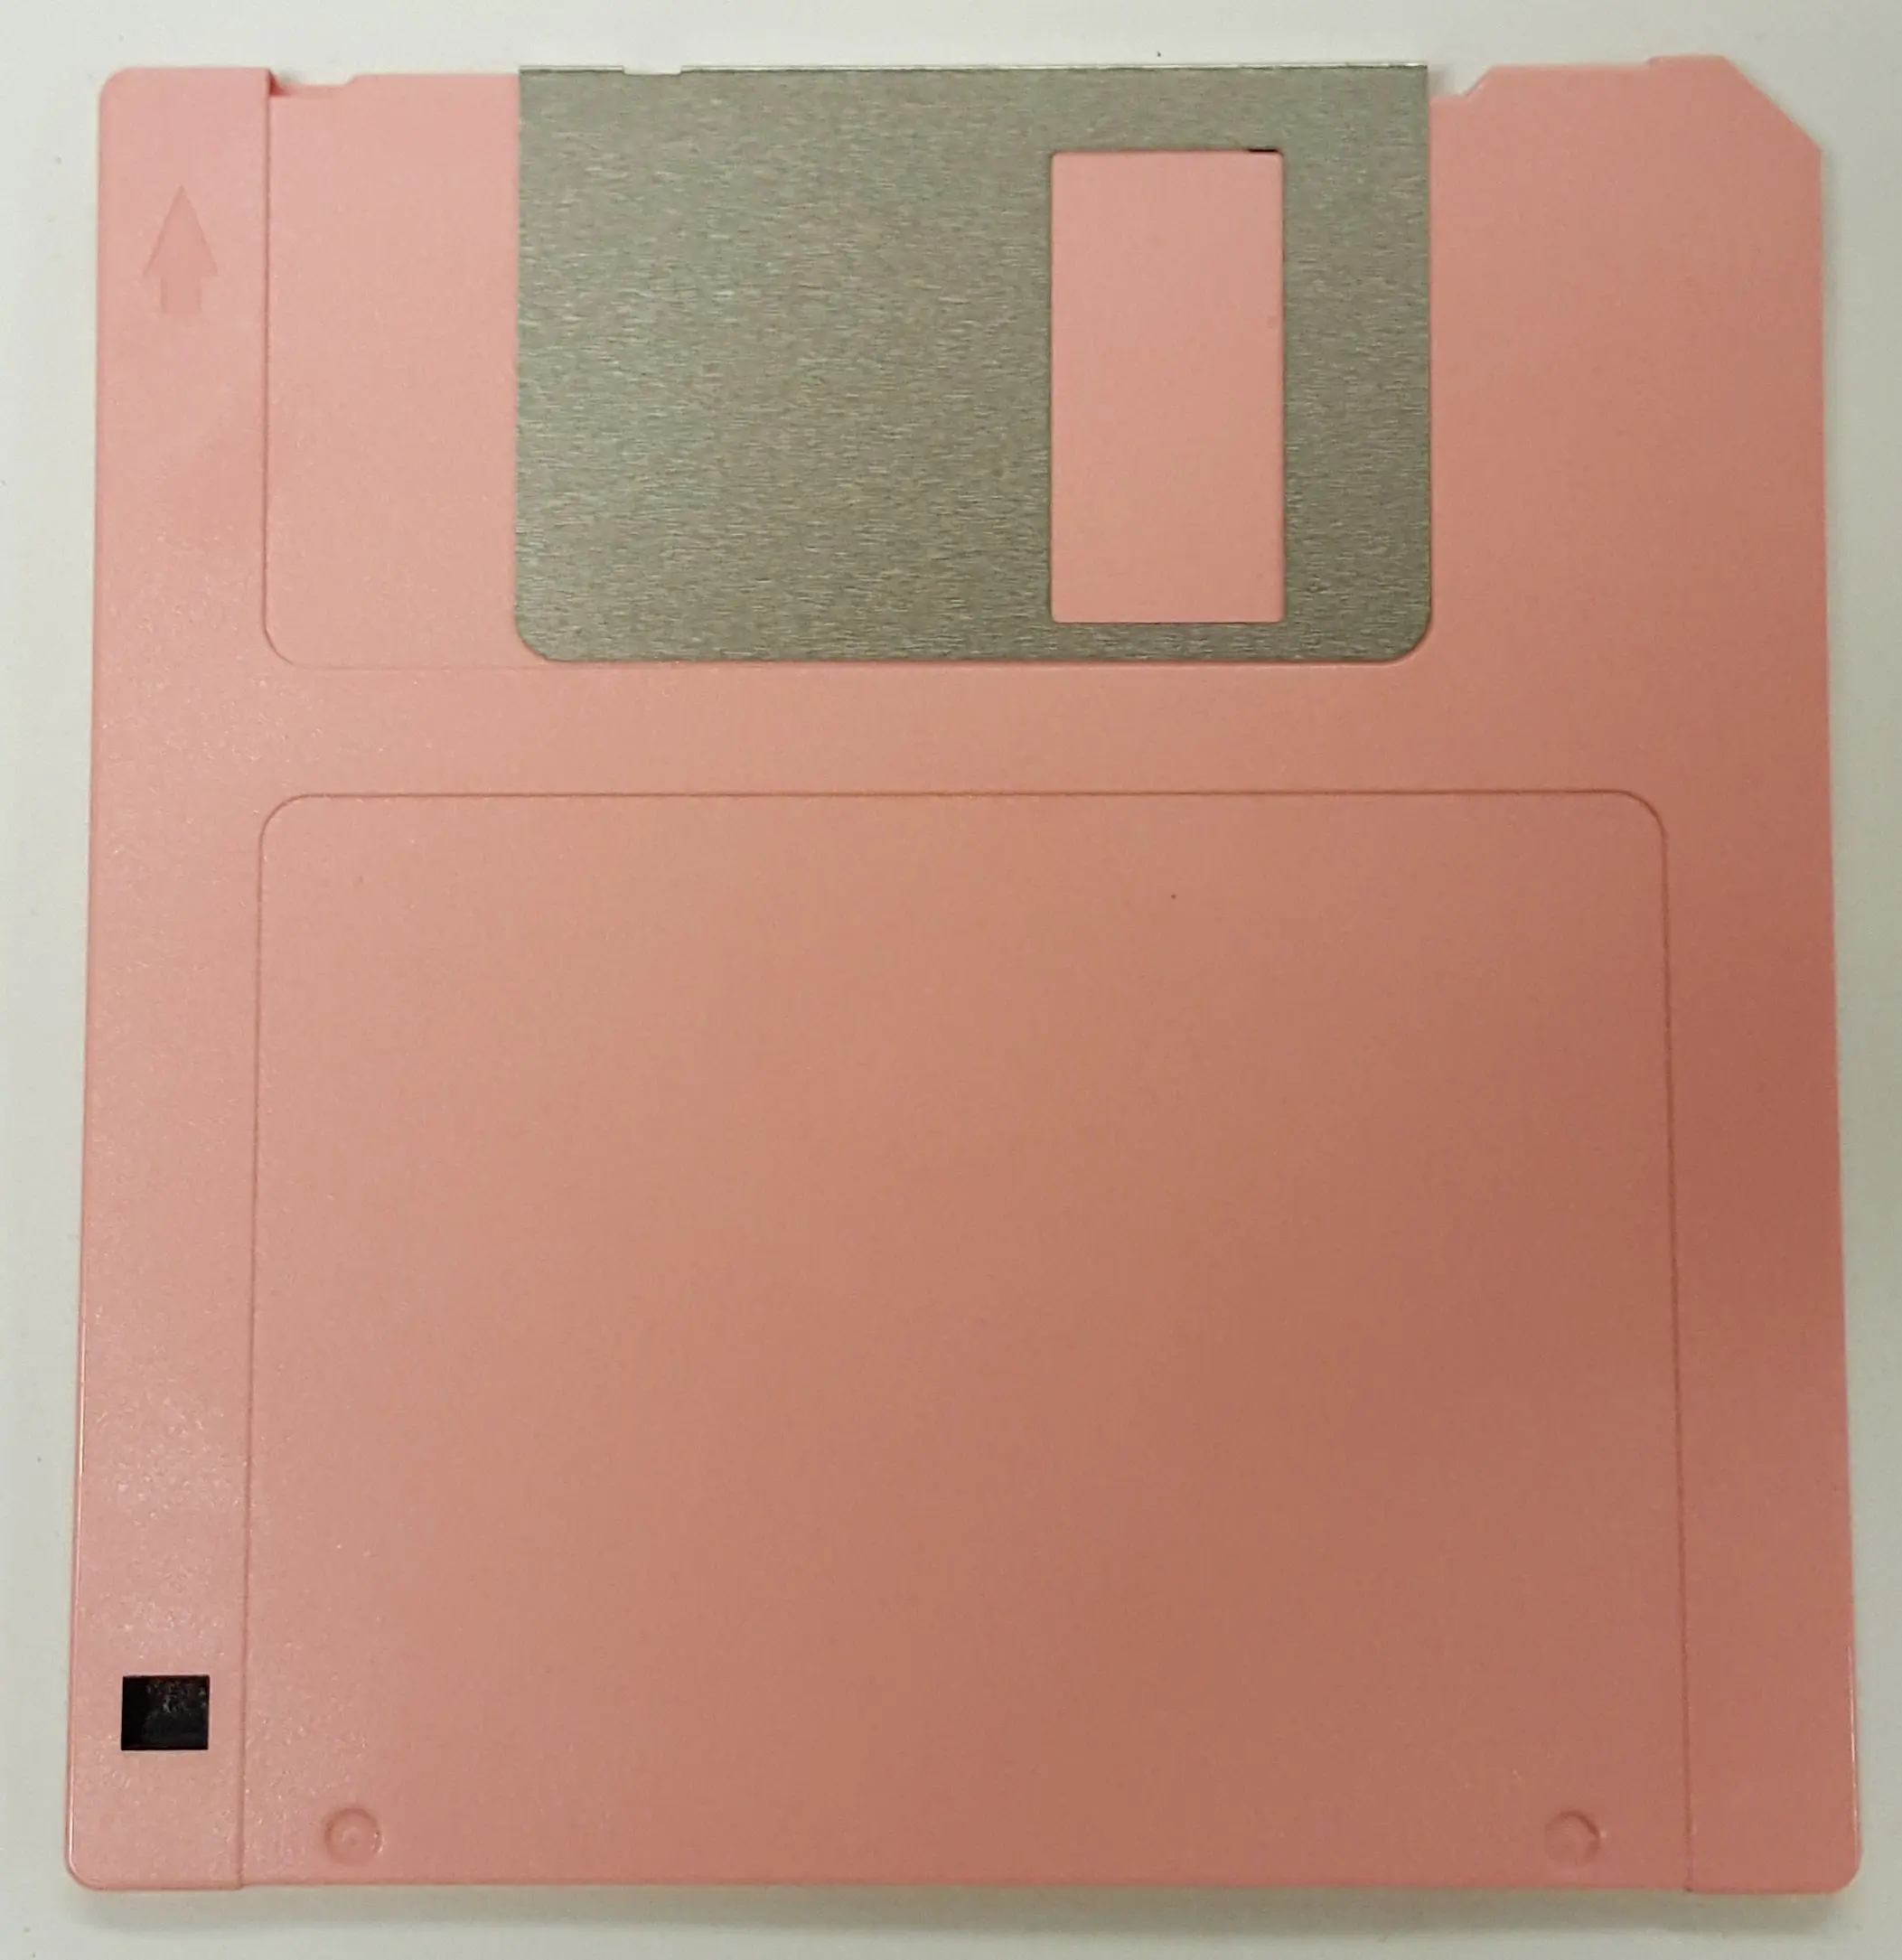 formatted floppy disk